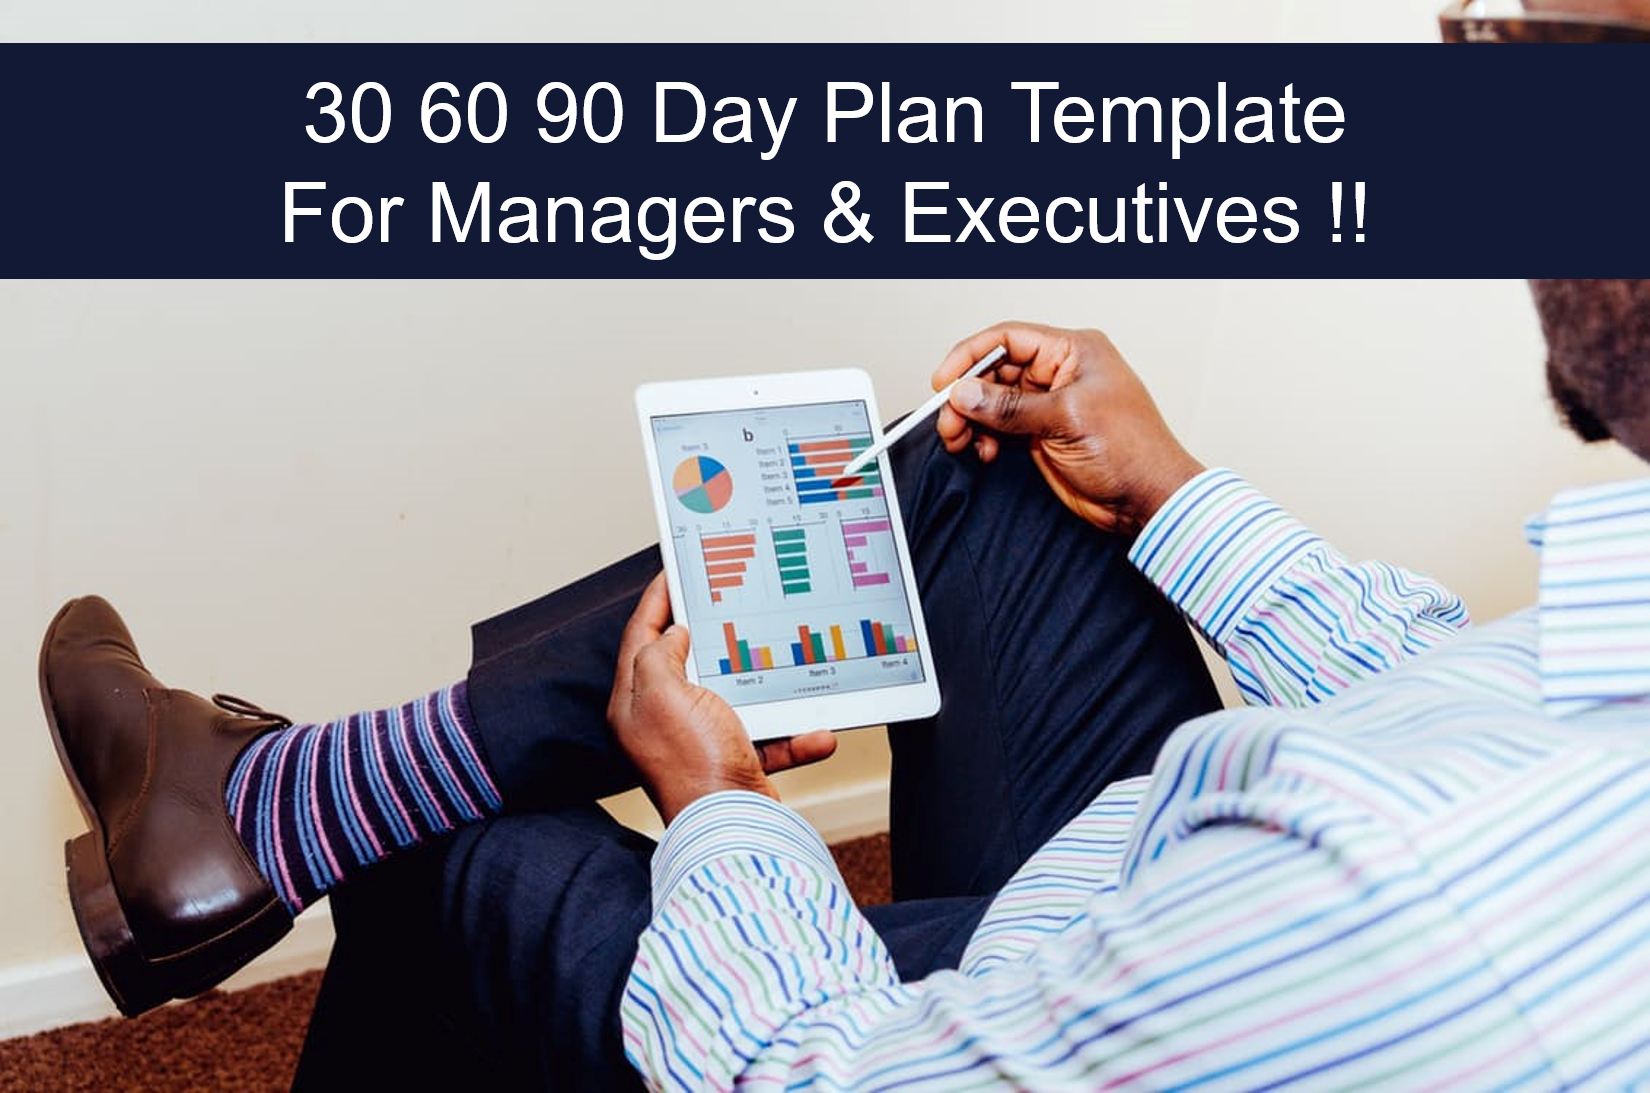 30 60 90 day plan for managers